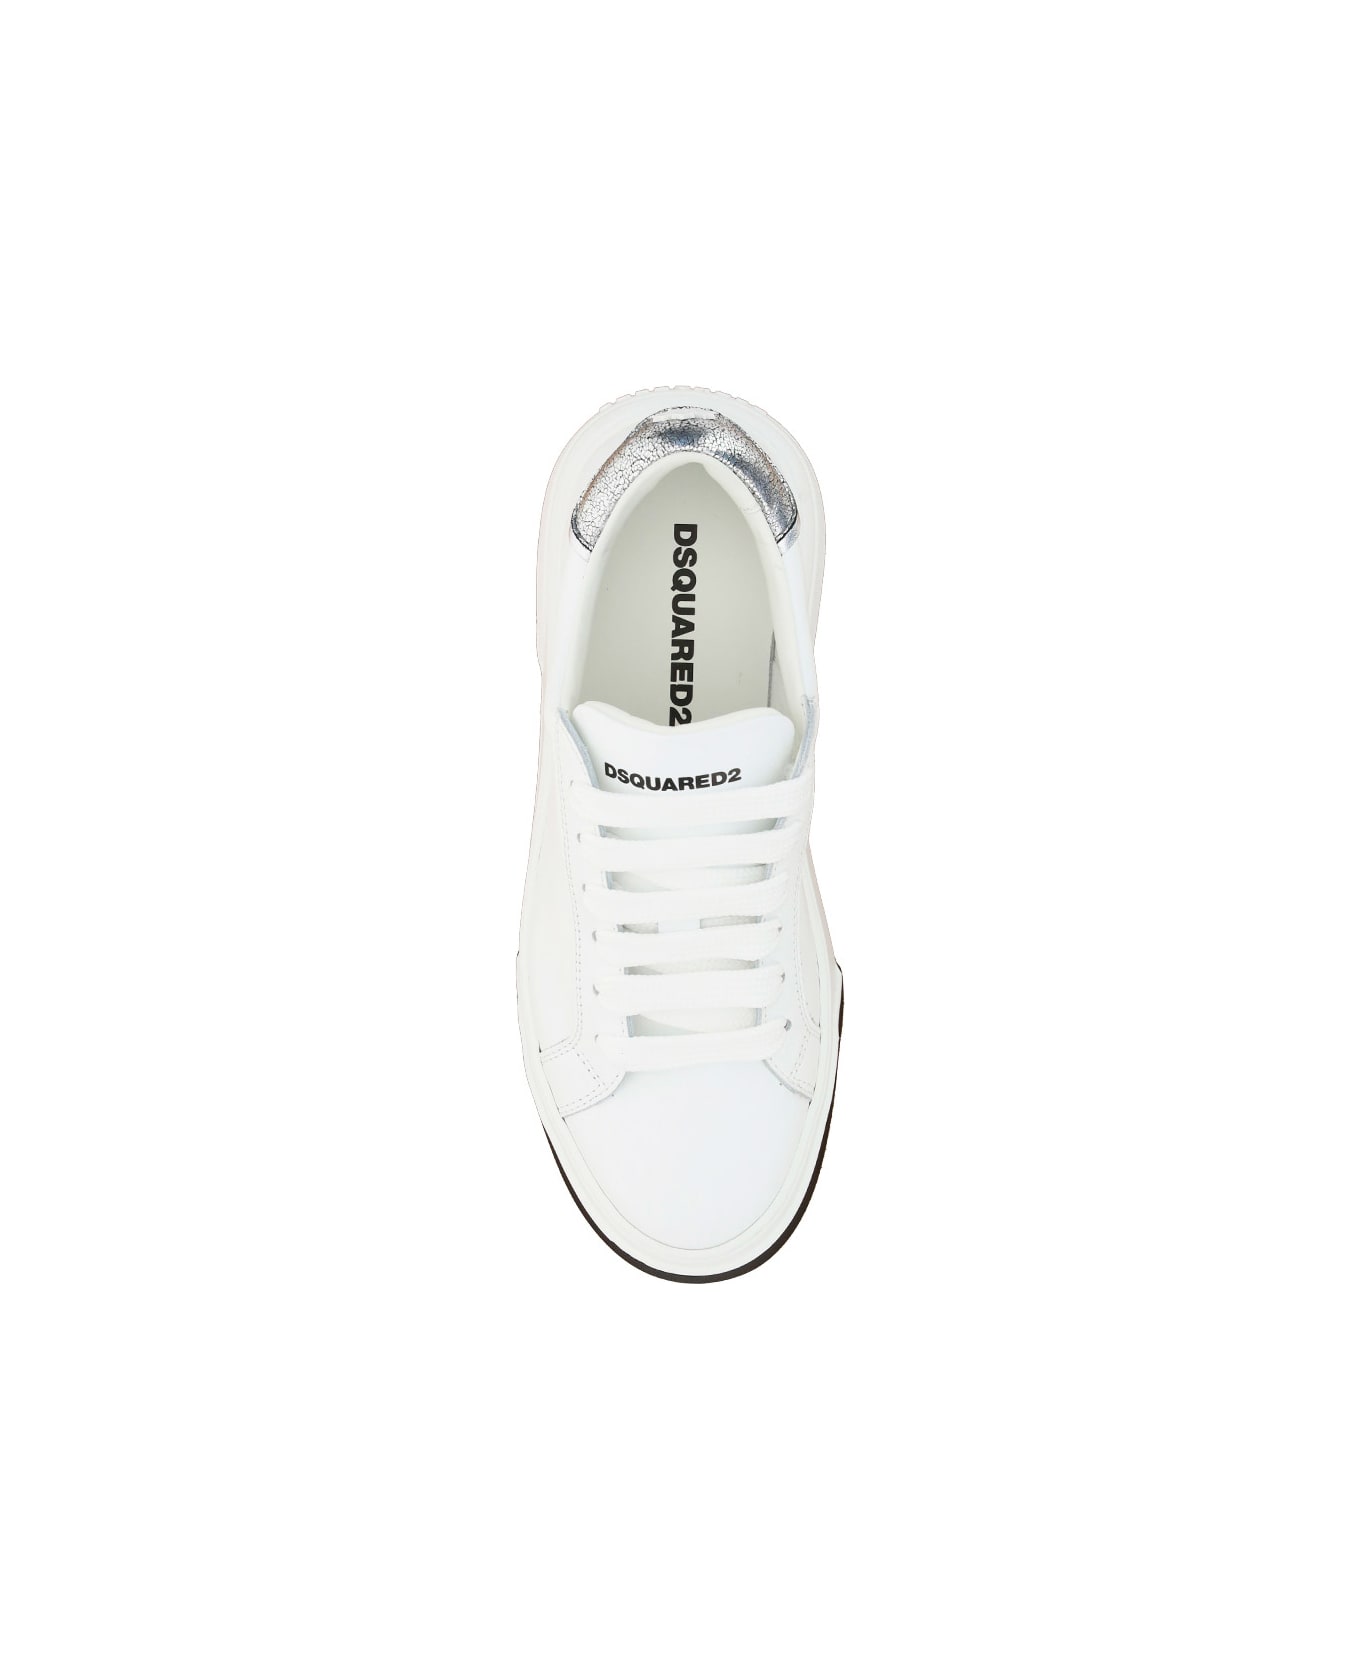 Dsquared2 Sneakers - Bianco+argento